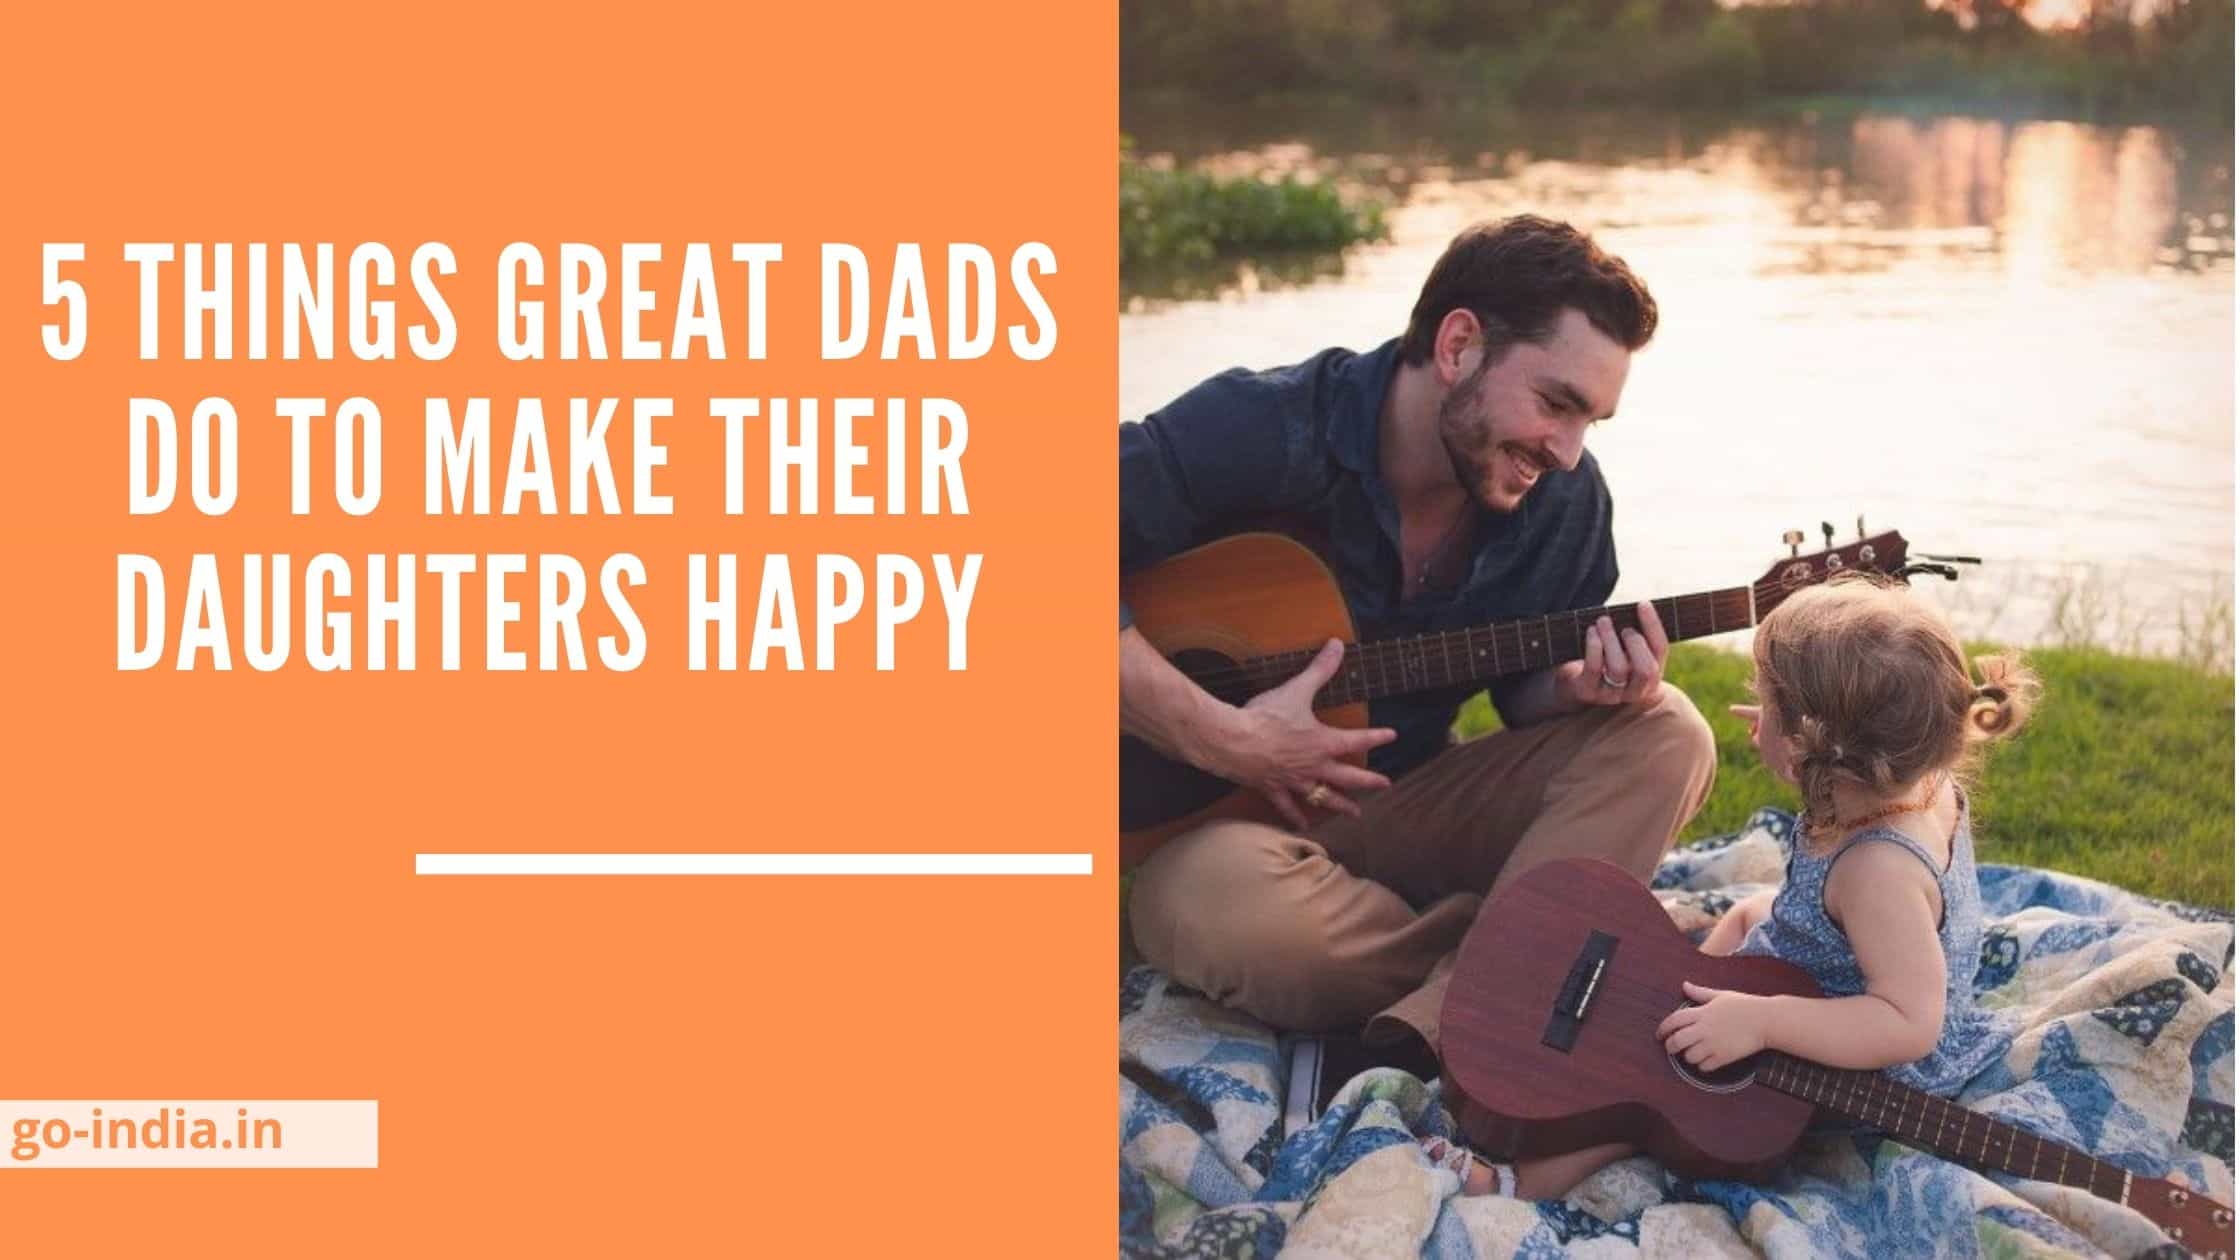 5 Things Great Dads do to Make Their Daughters Happy